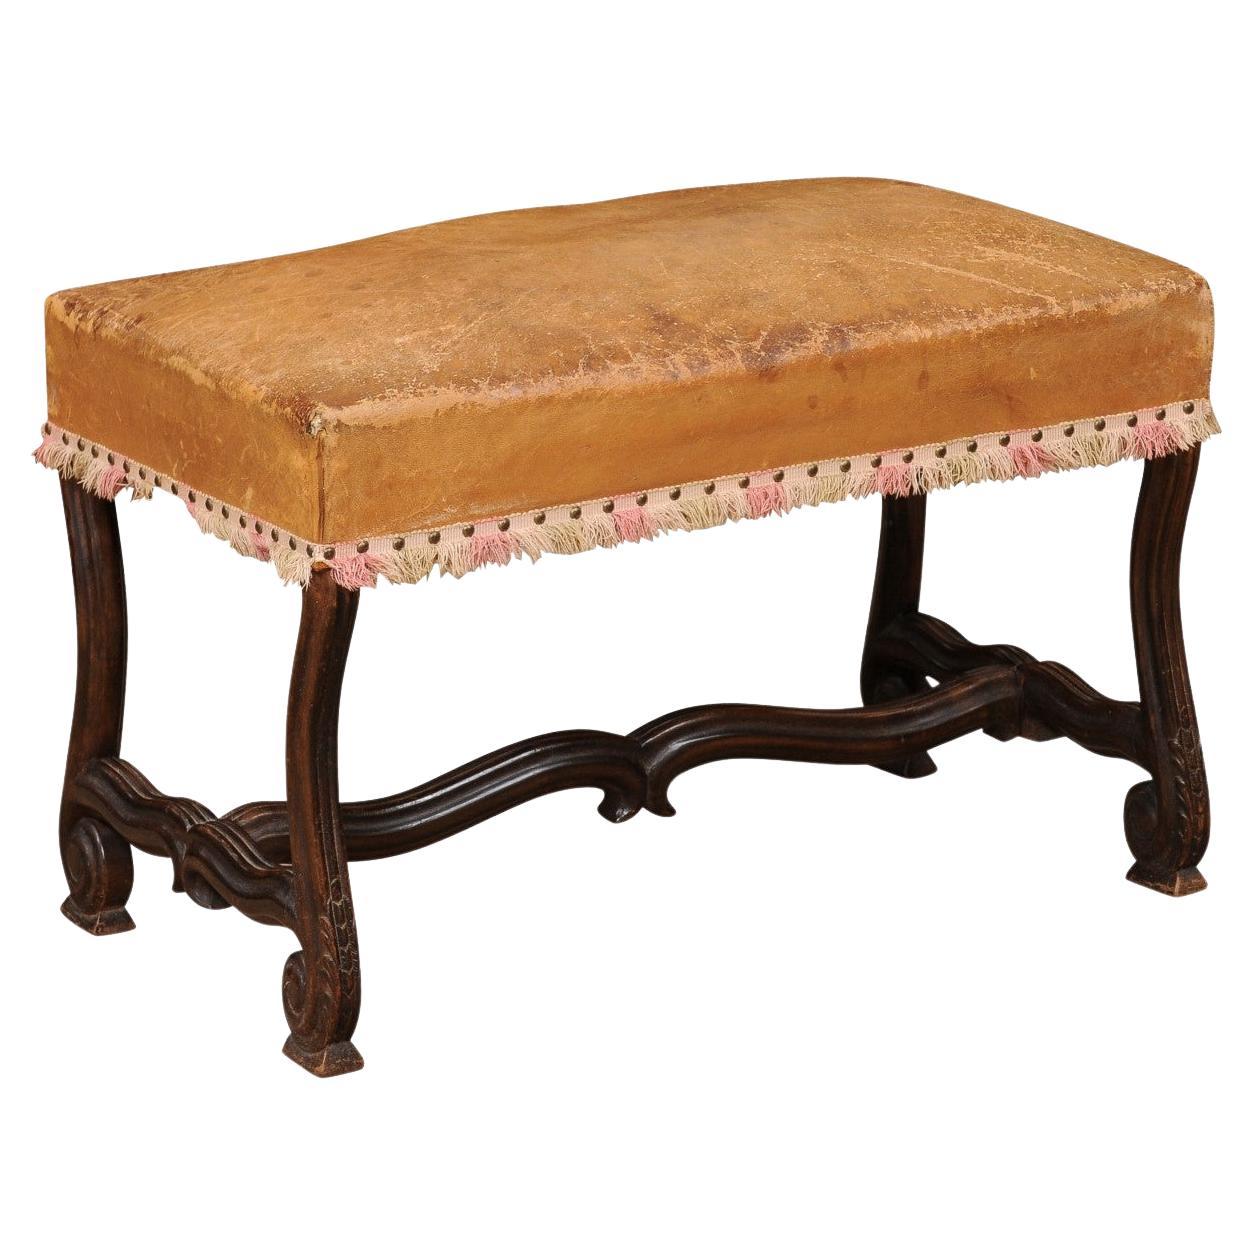 French Louis XIV Style Mutton Bone Bench with Tan Leather Top & Stretcher